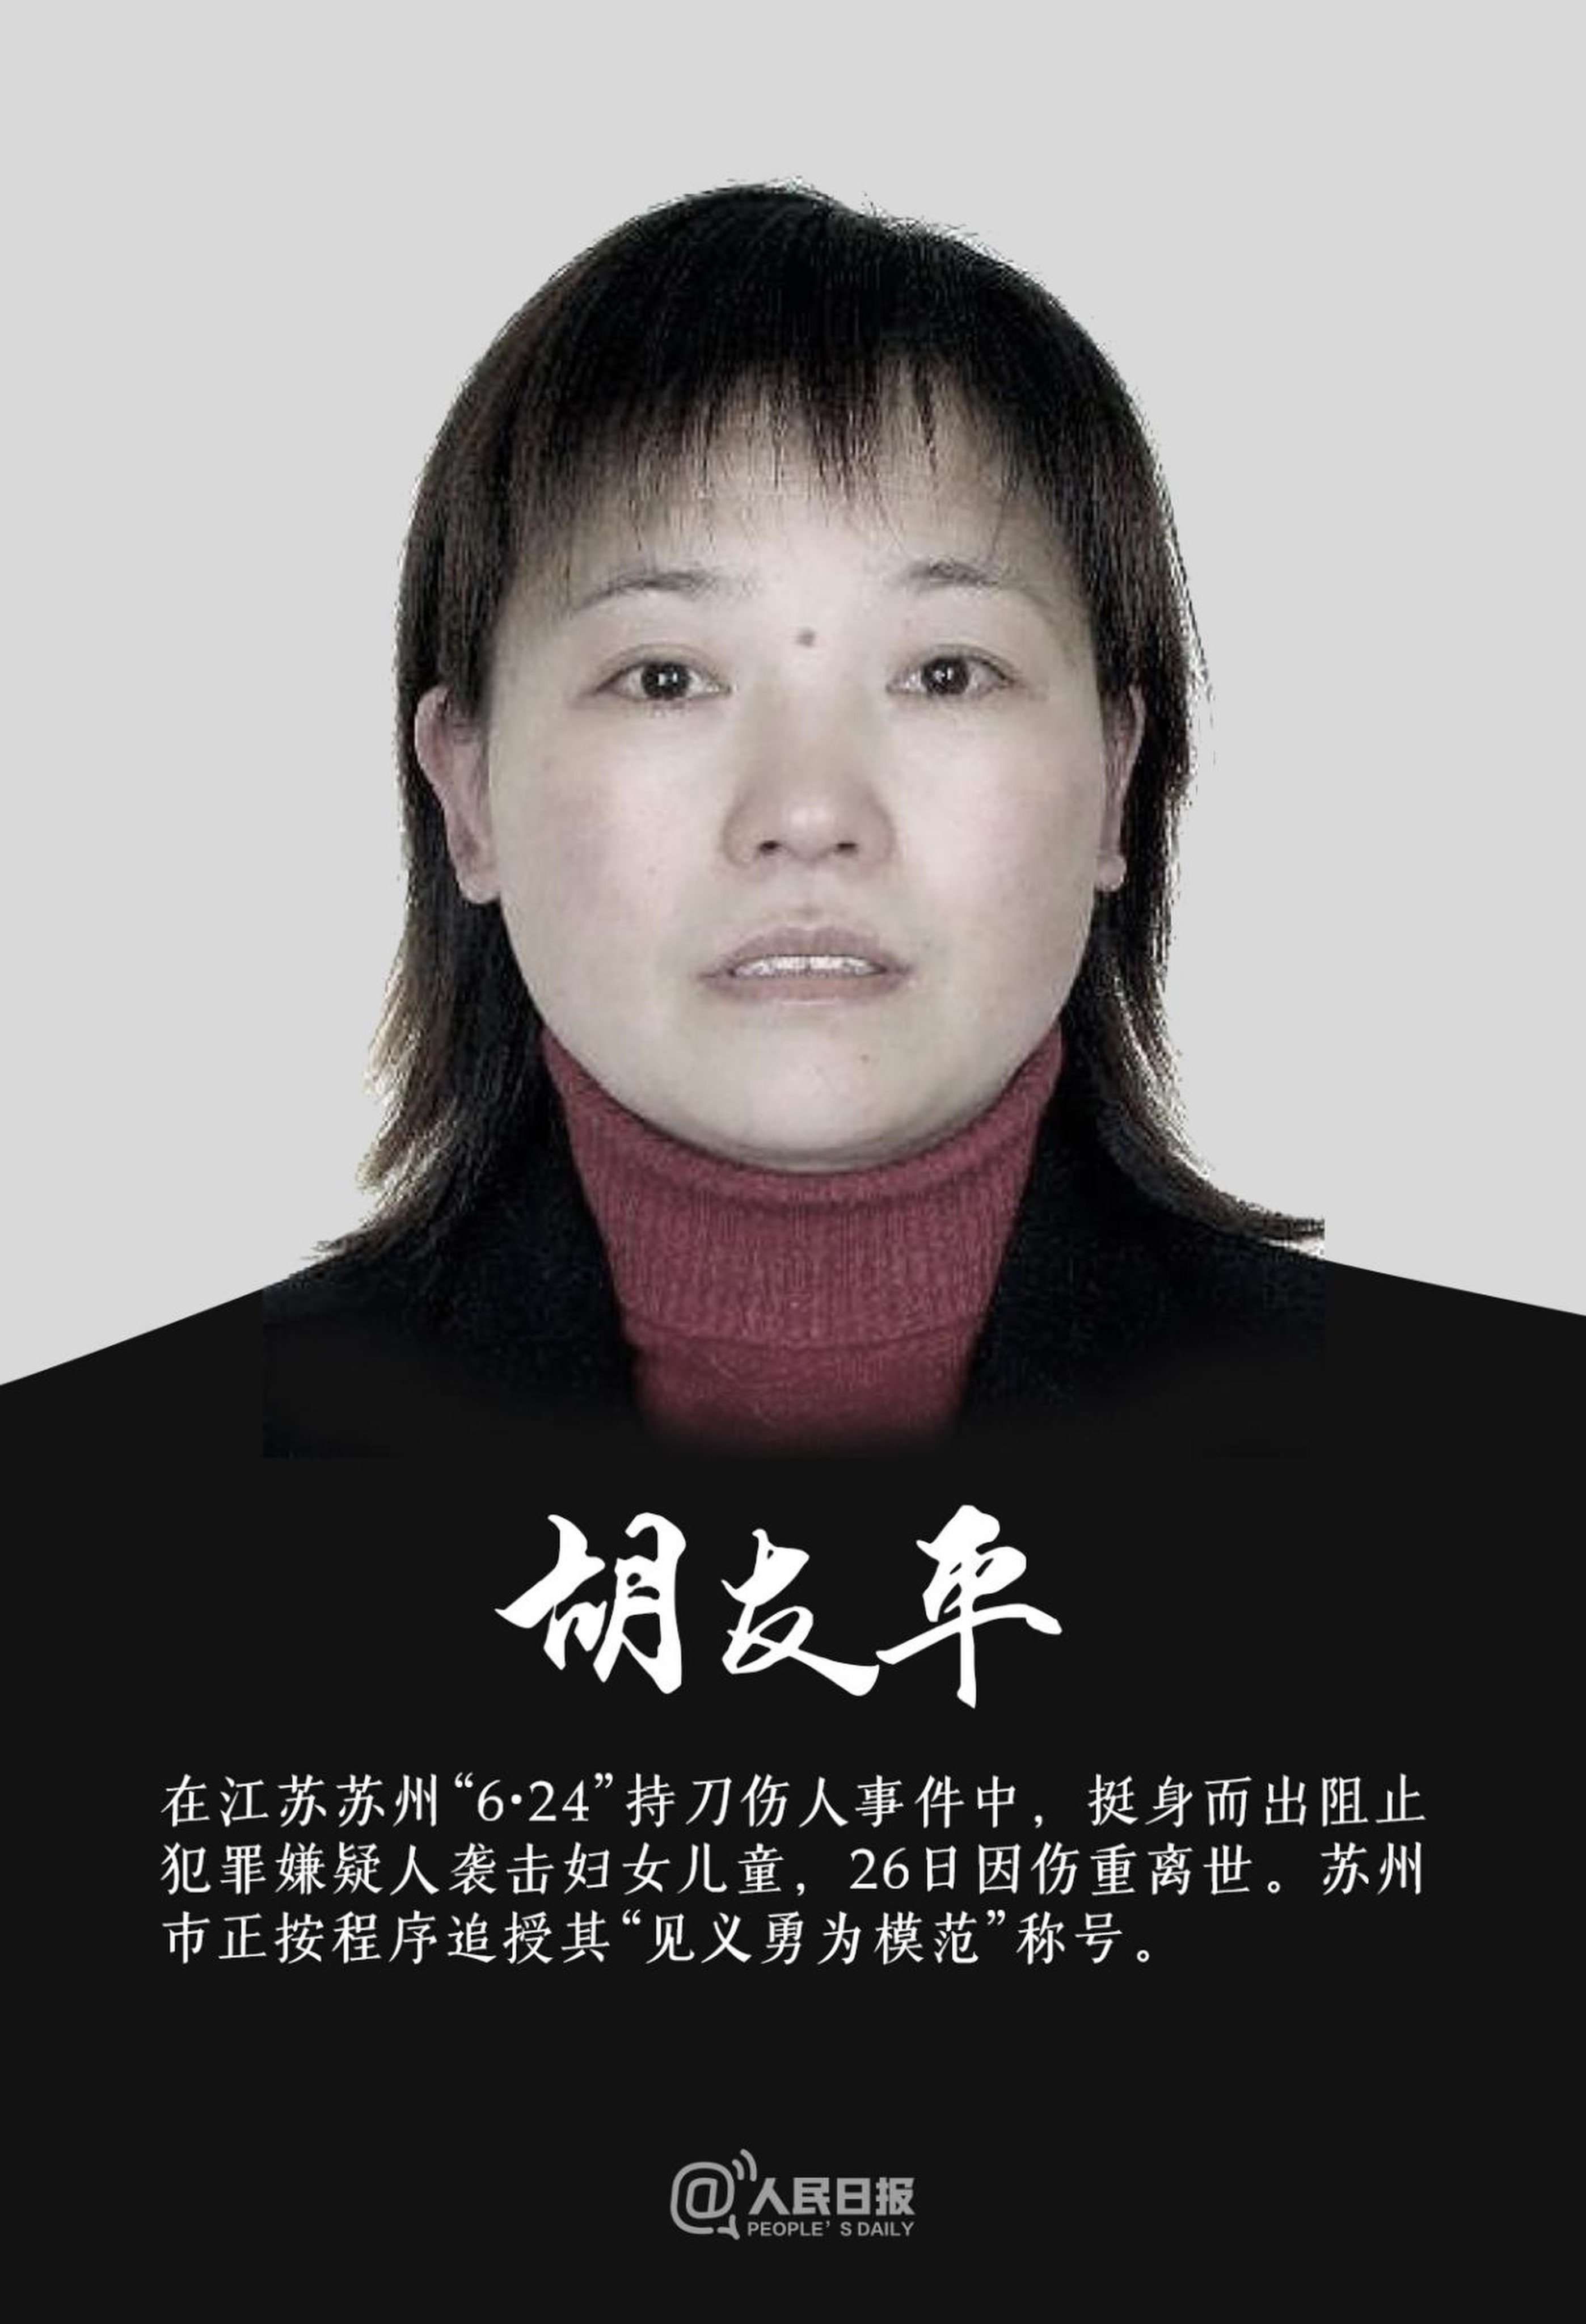 Chinese woman Hu Youping, aged 54, has died days after stepping in to prevent a knife attack. Suzhou police said “her courage and kindness represented the general Chinese public.” Photo: peopleapp.com